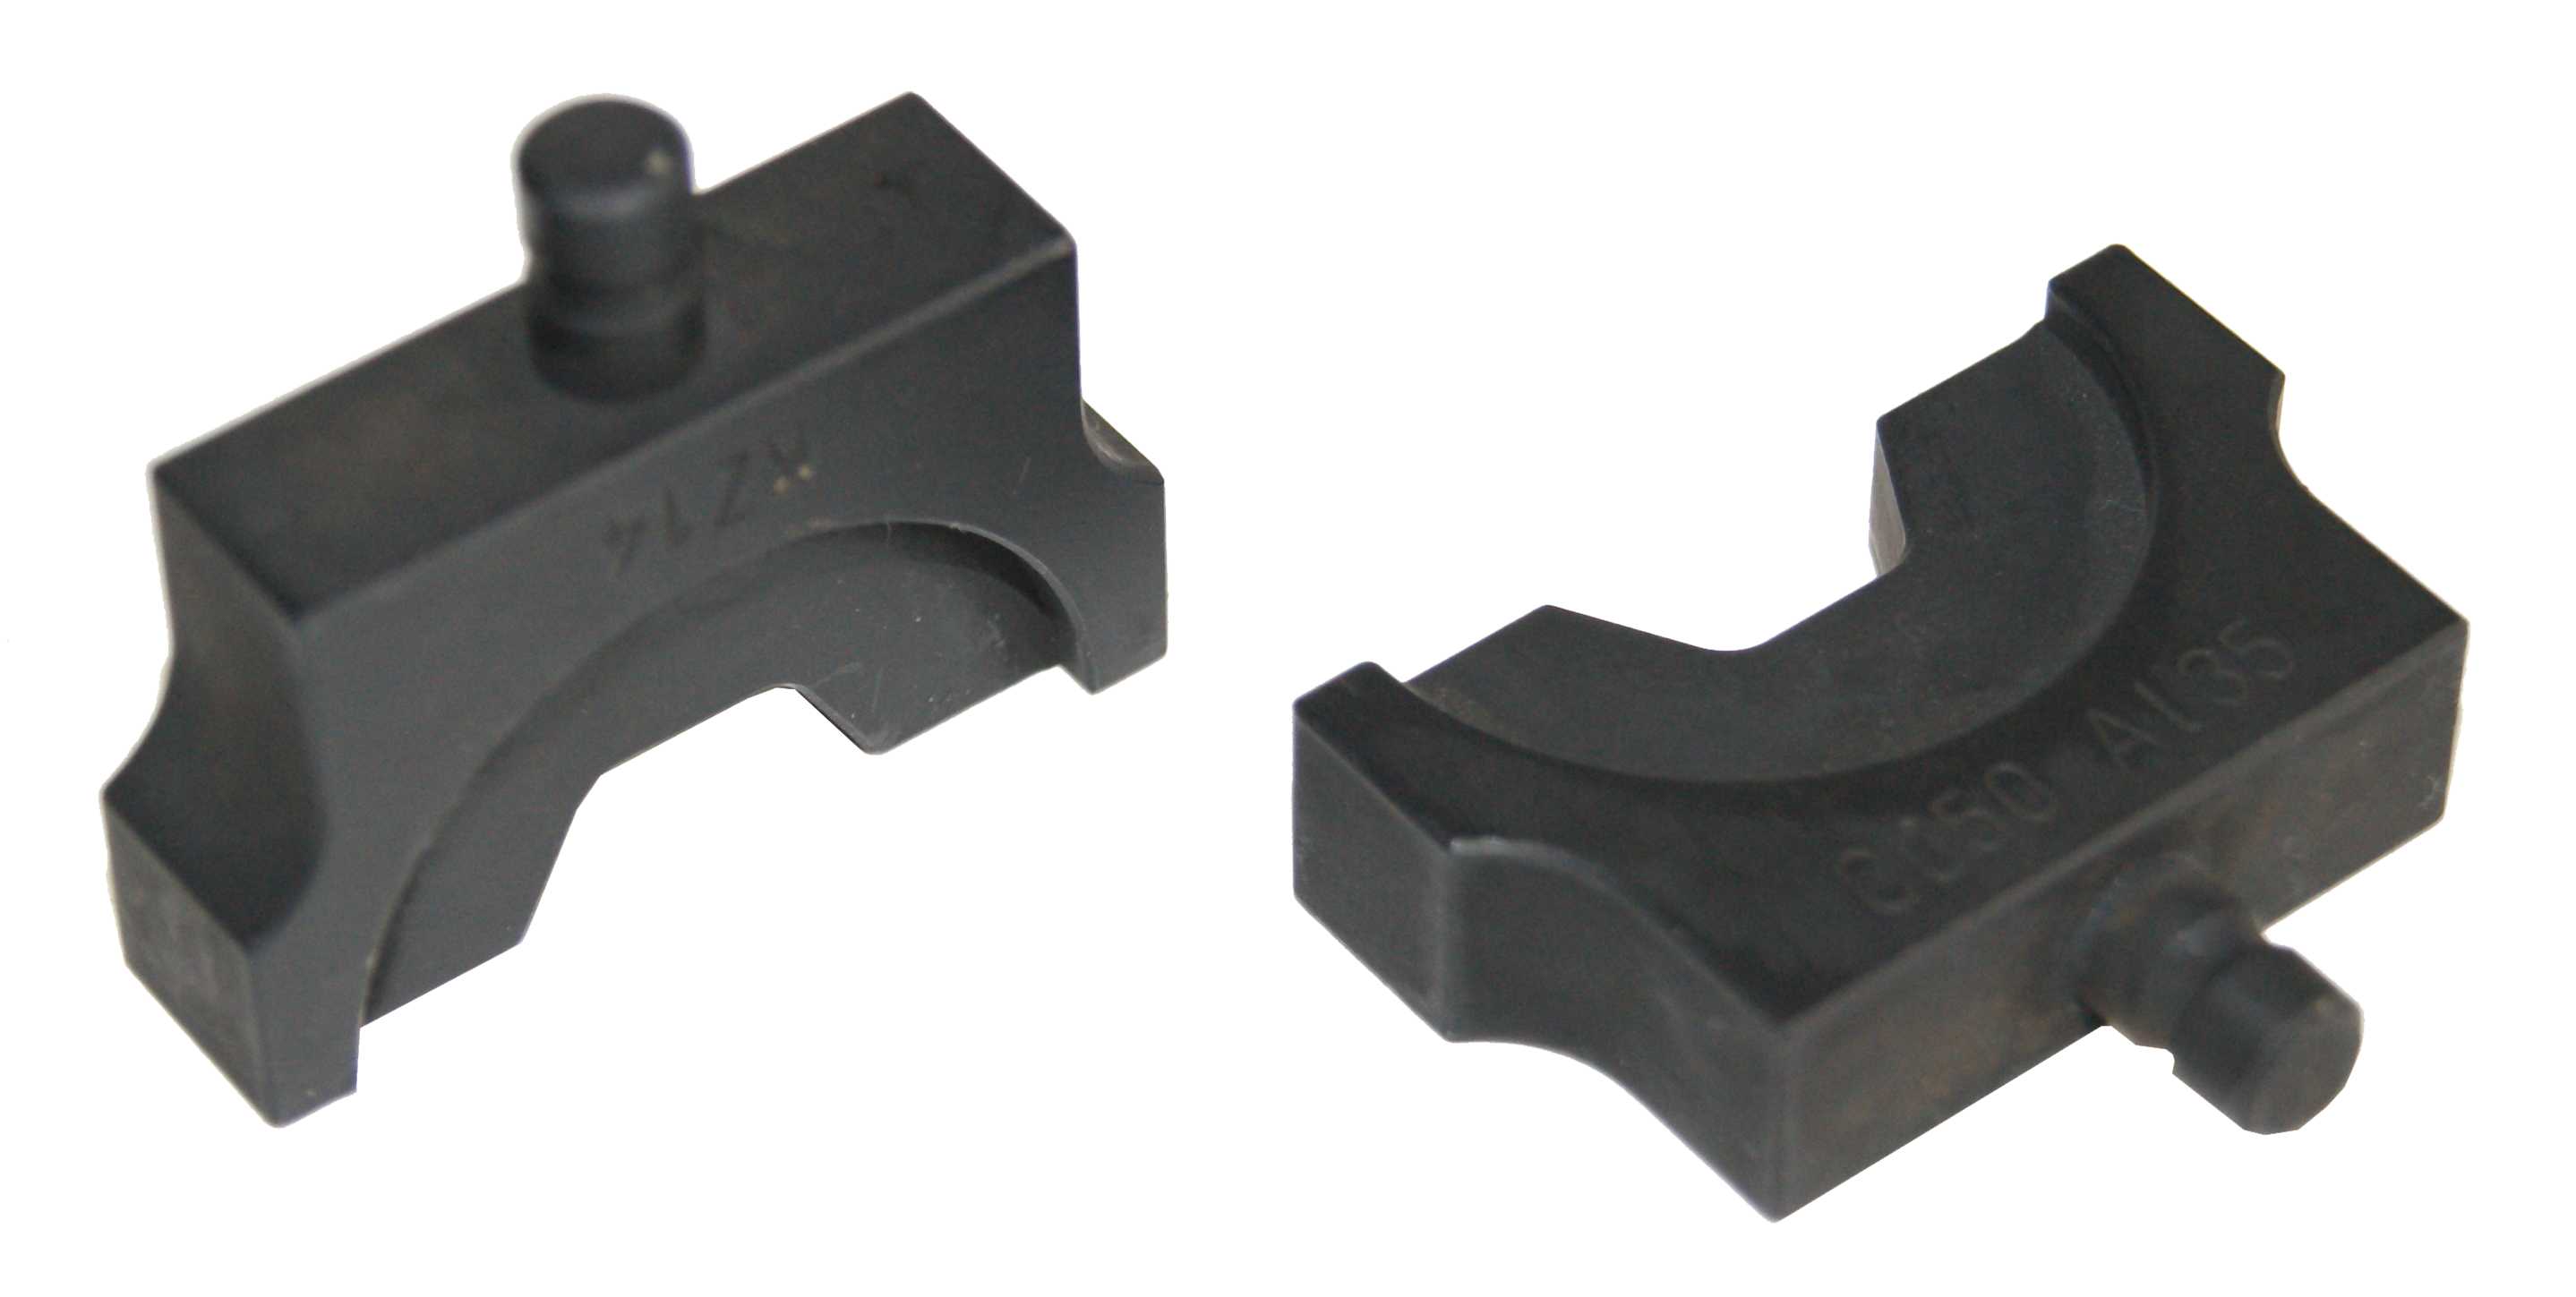 PH-35: Hexagonal crimping dies for cable lugs and connectors, die series "35"